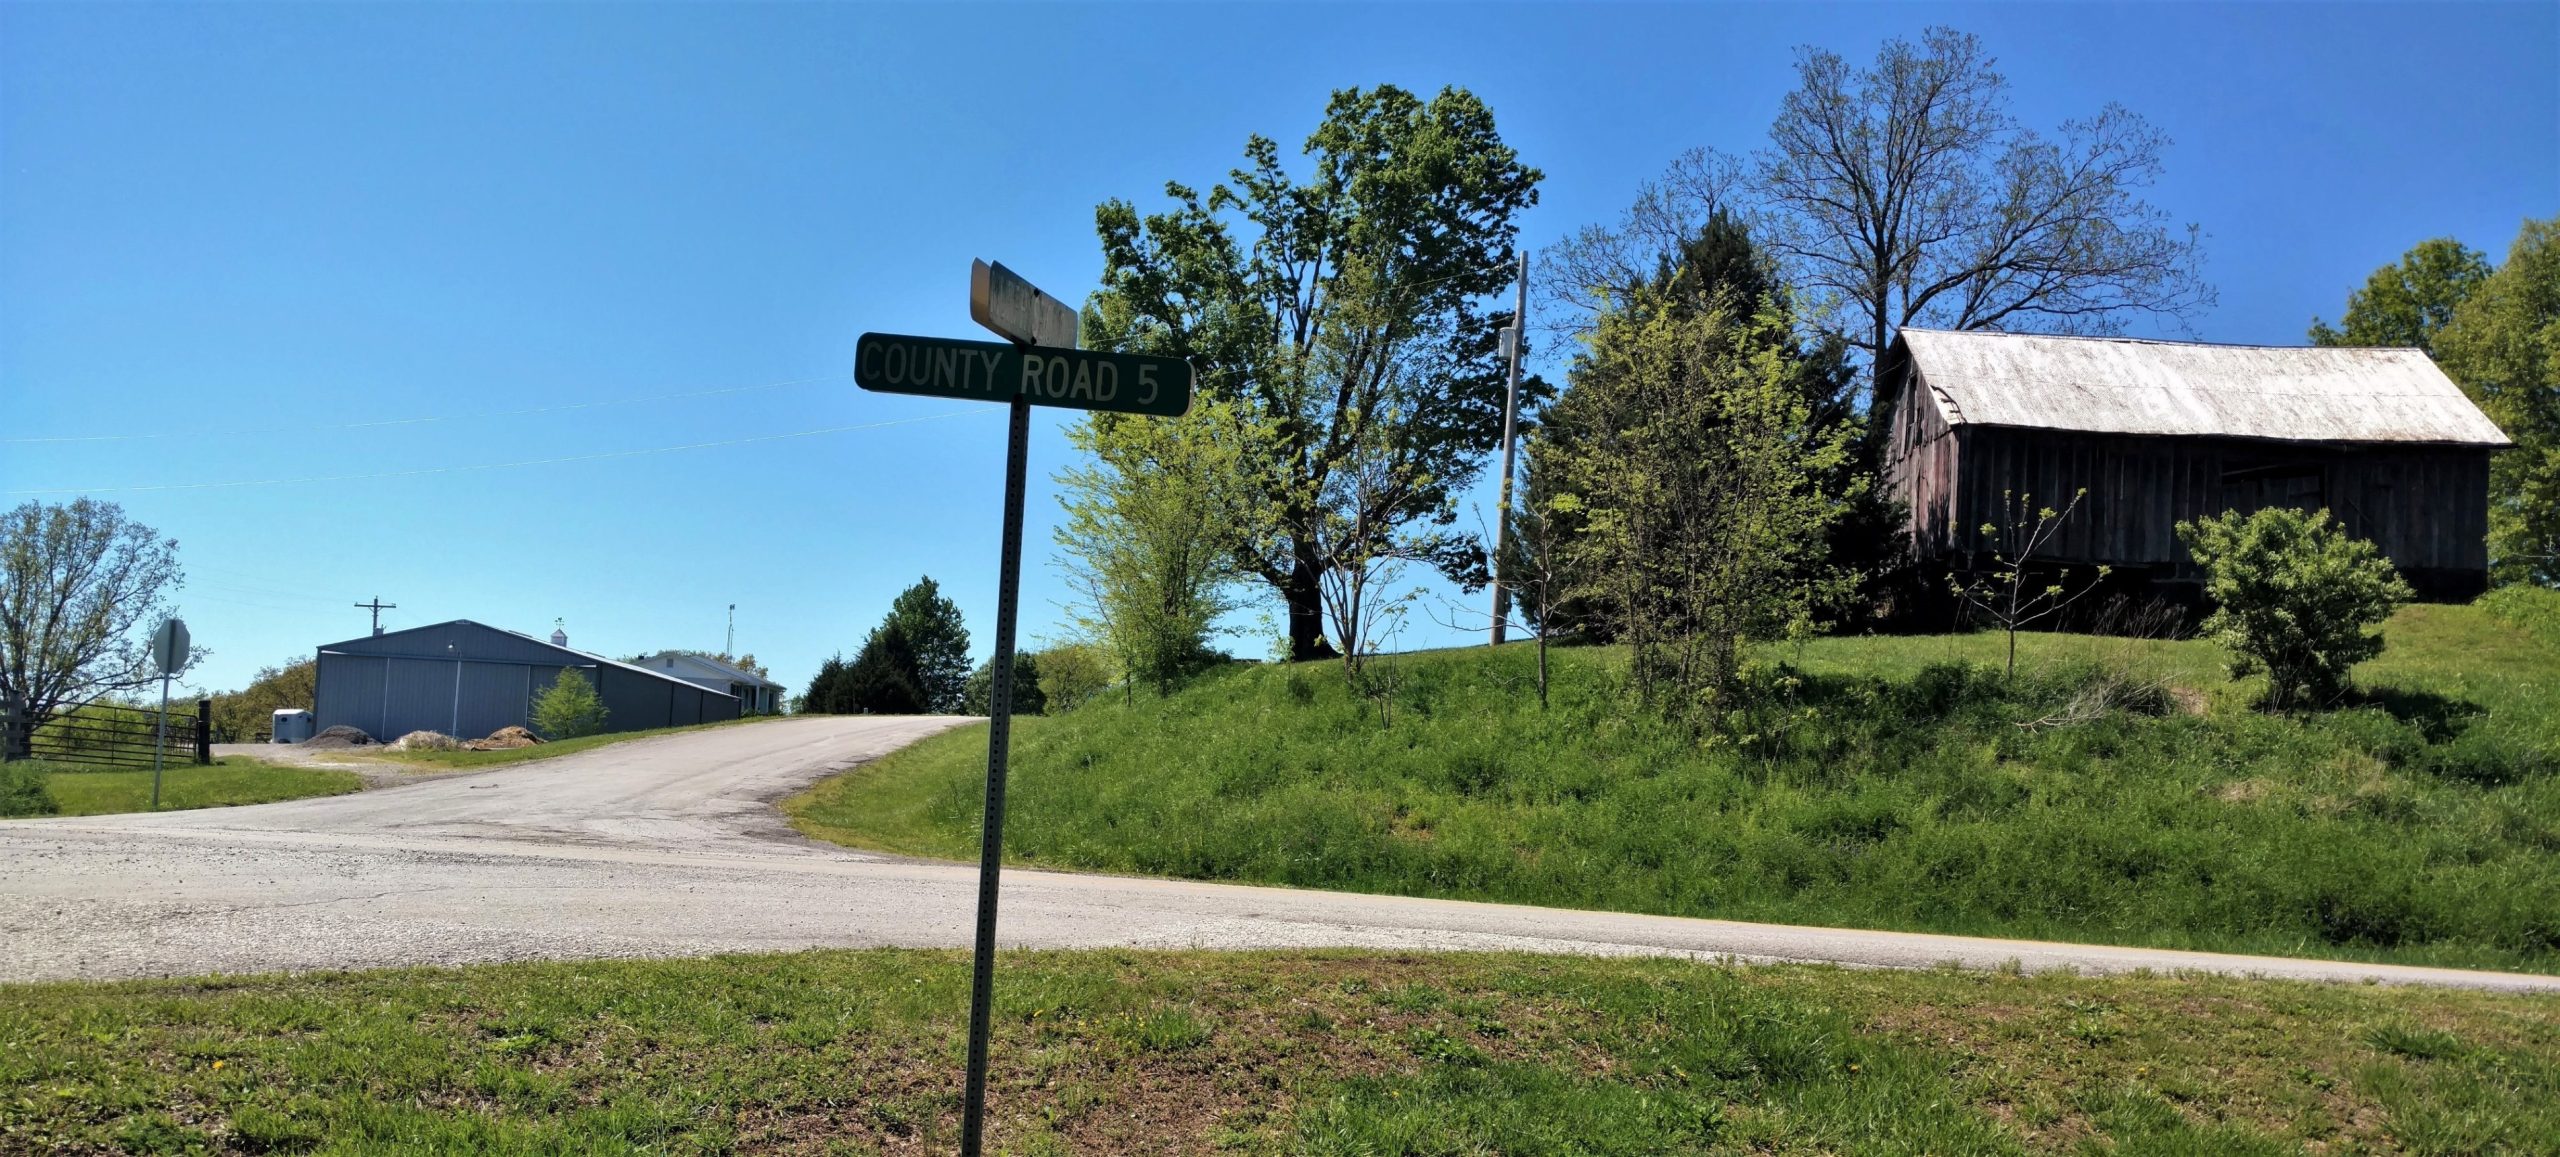 Photograph of the intersection of County Road 5 and Murphysboro Road, southeastern Randolph County, Illinois.